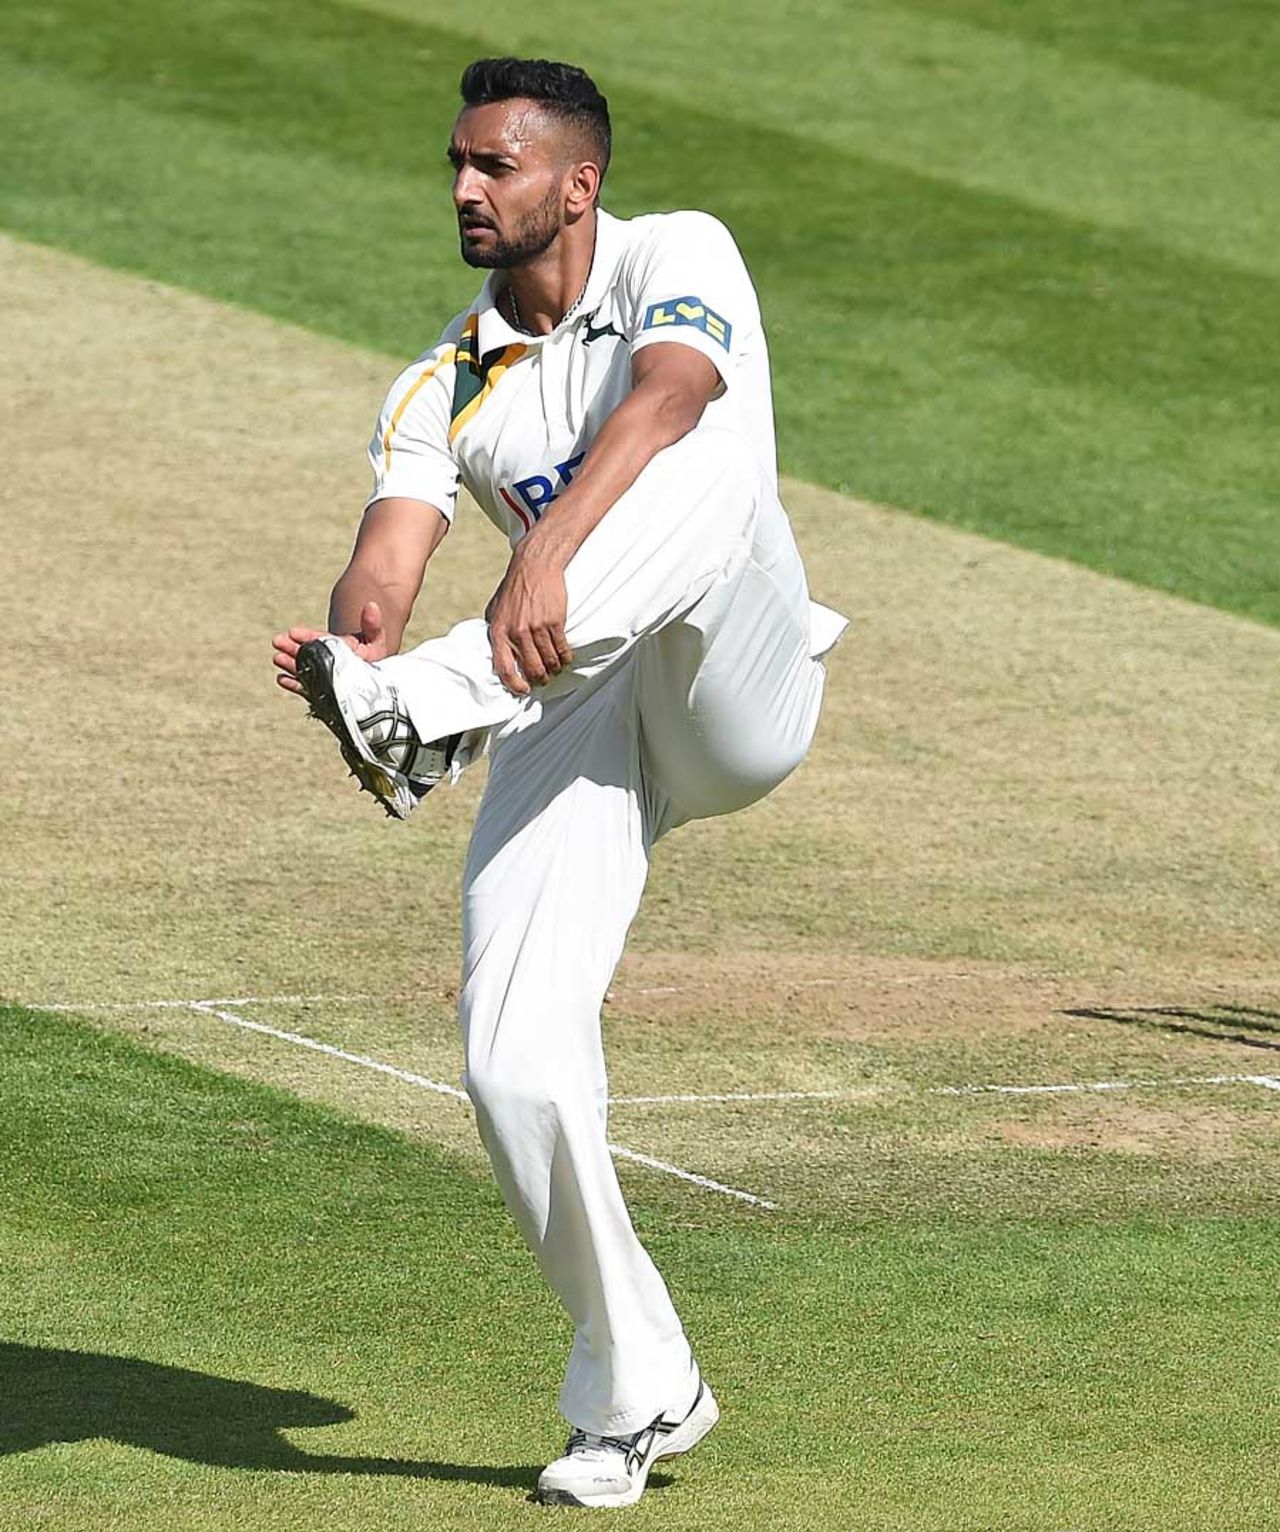 The Ministry of Silly Walks from Ajmal Shahzad?, Durham v Nottinghamshire, County Championship, Division One, Chester-le-Street, August 31, 2014